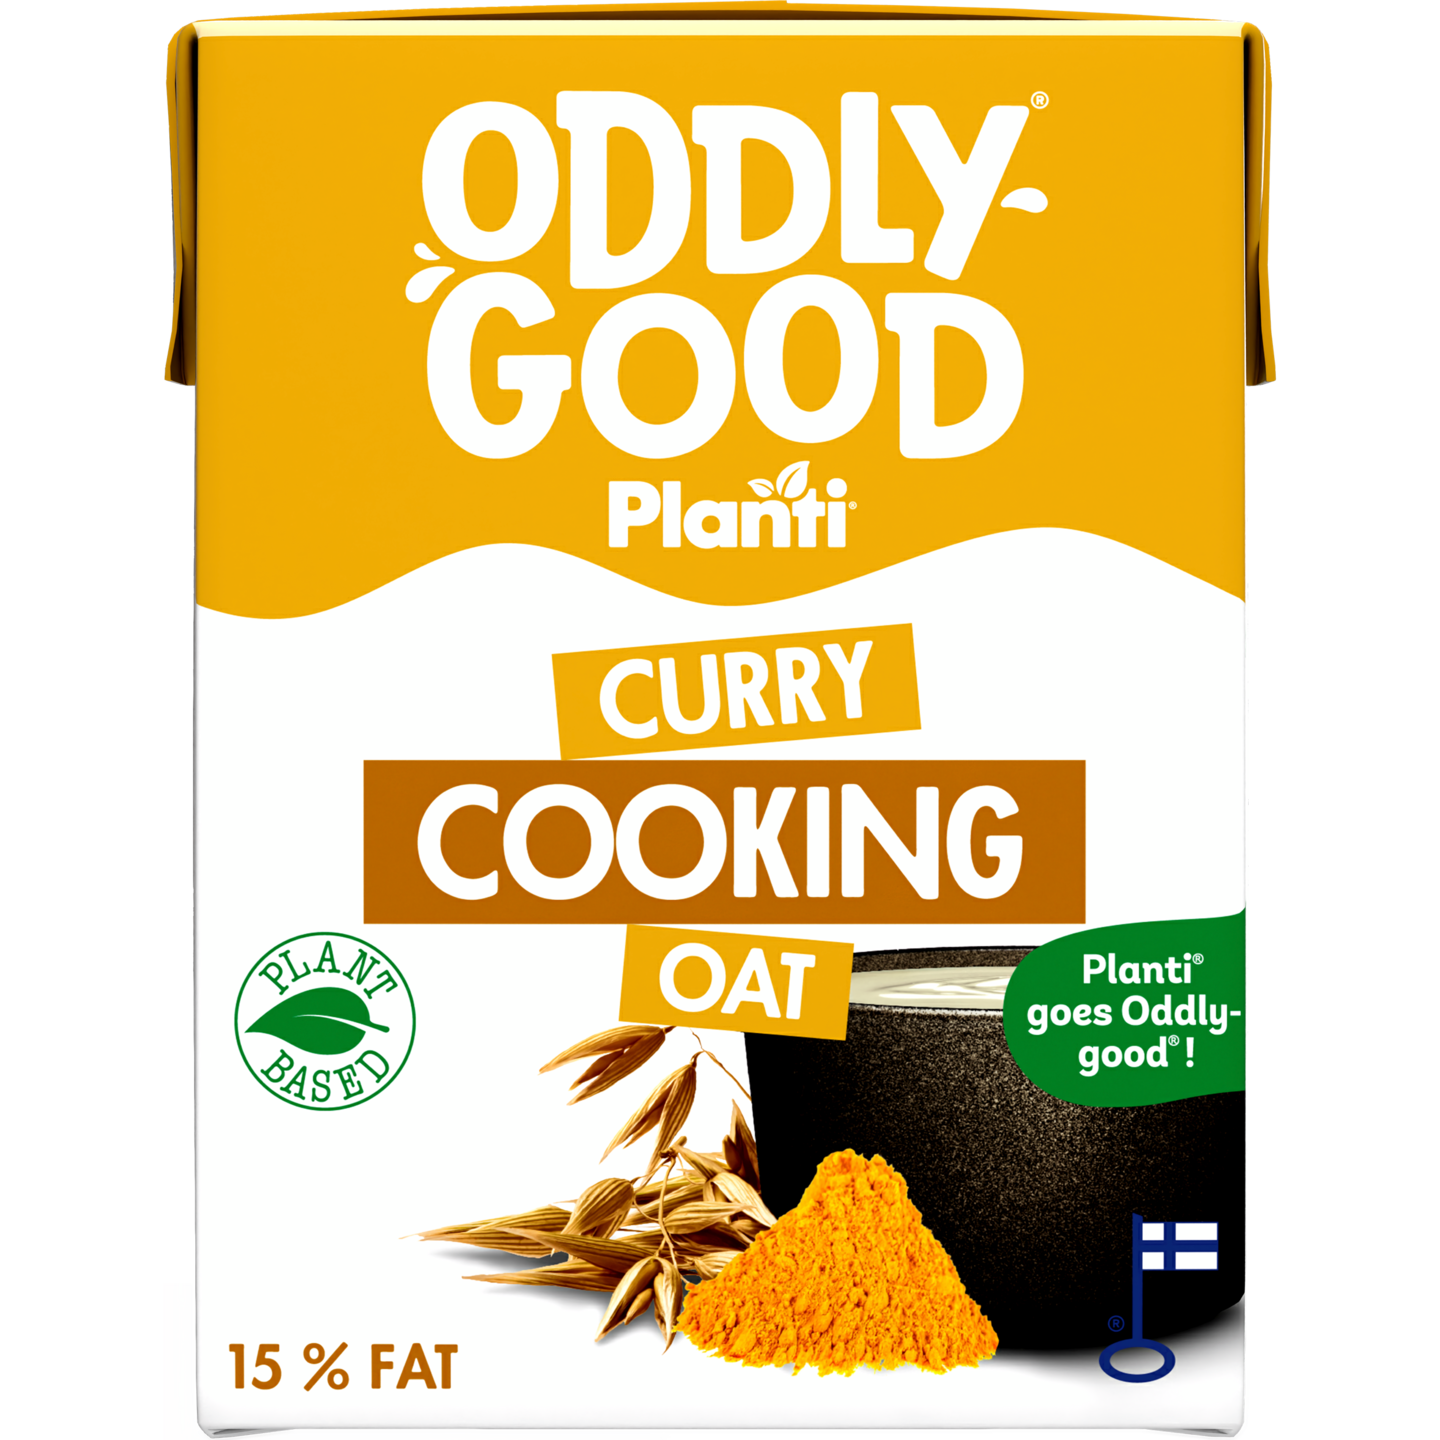 Oddlygood Planti Cooking Oat 2dl curry